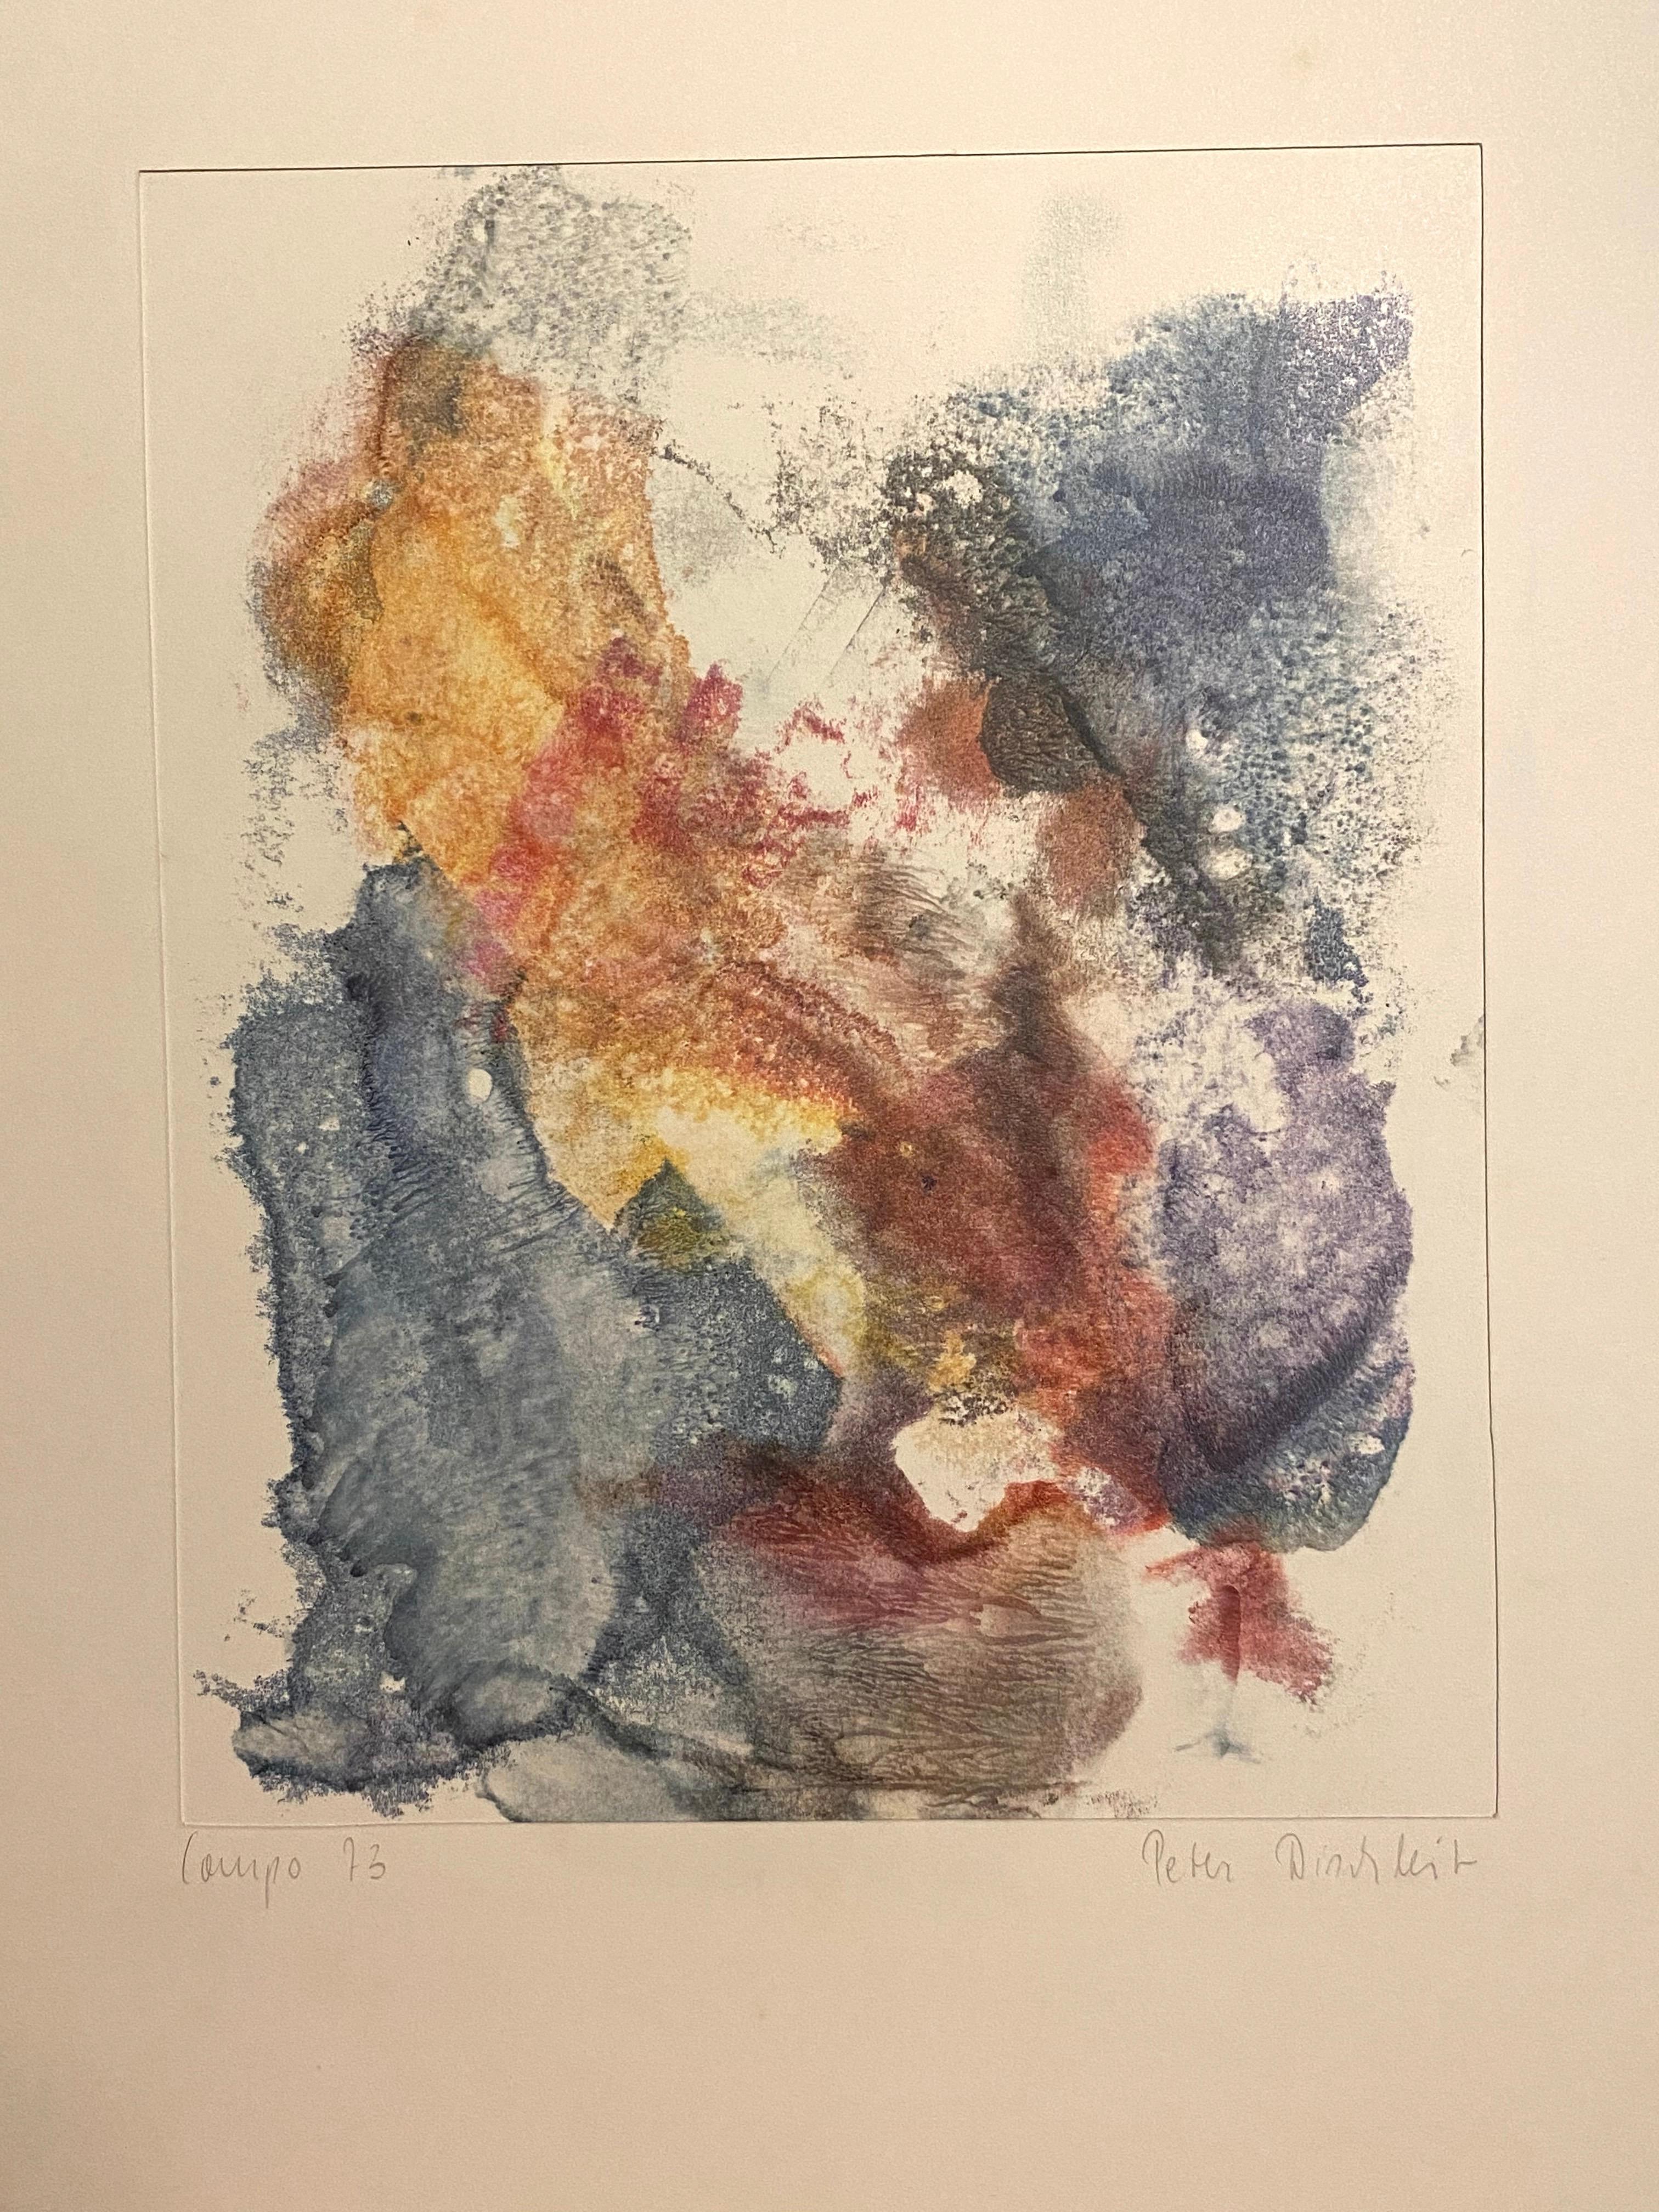 Abstract Composition - Ink and Watercolor on Paper by Peter Dischleit - 1973